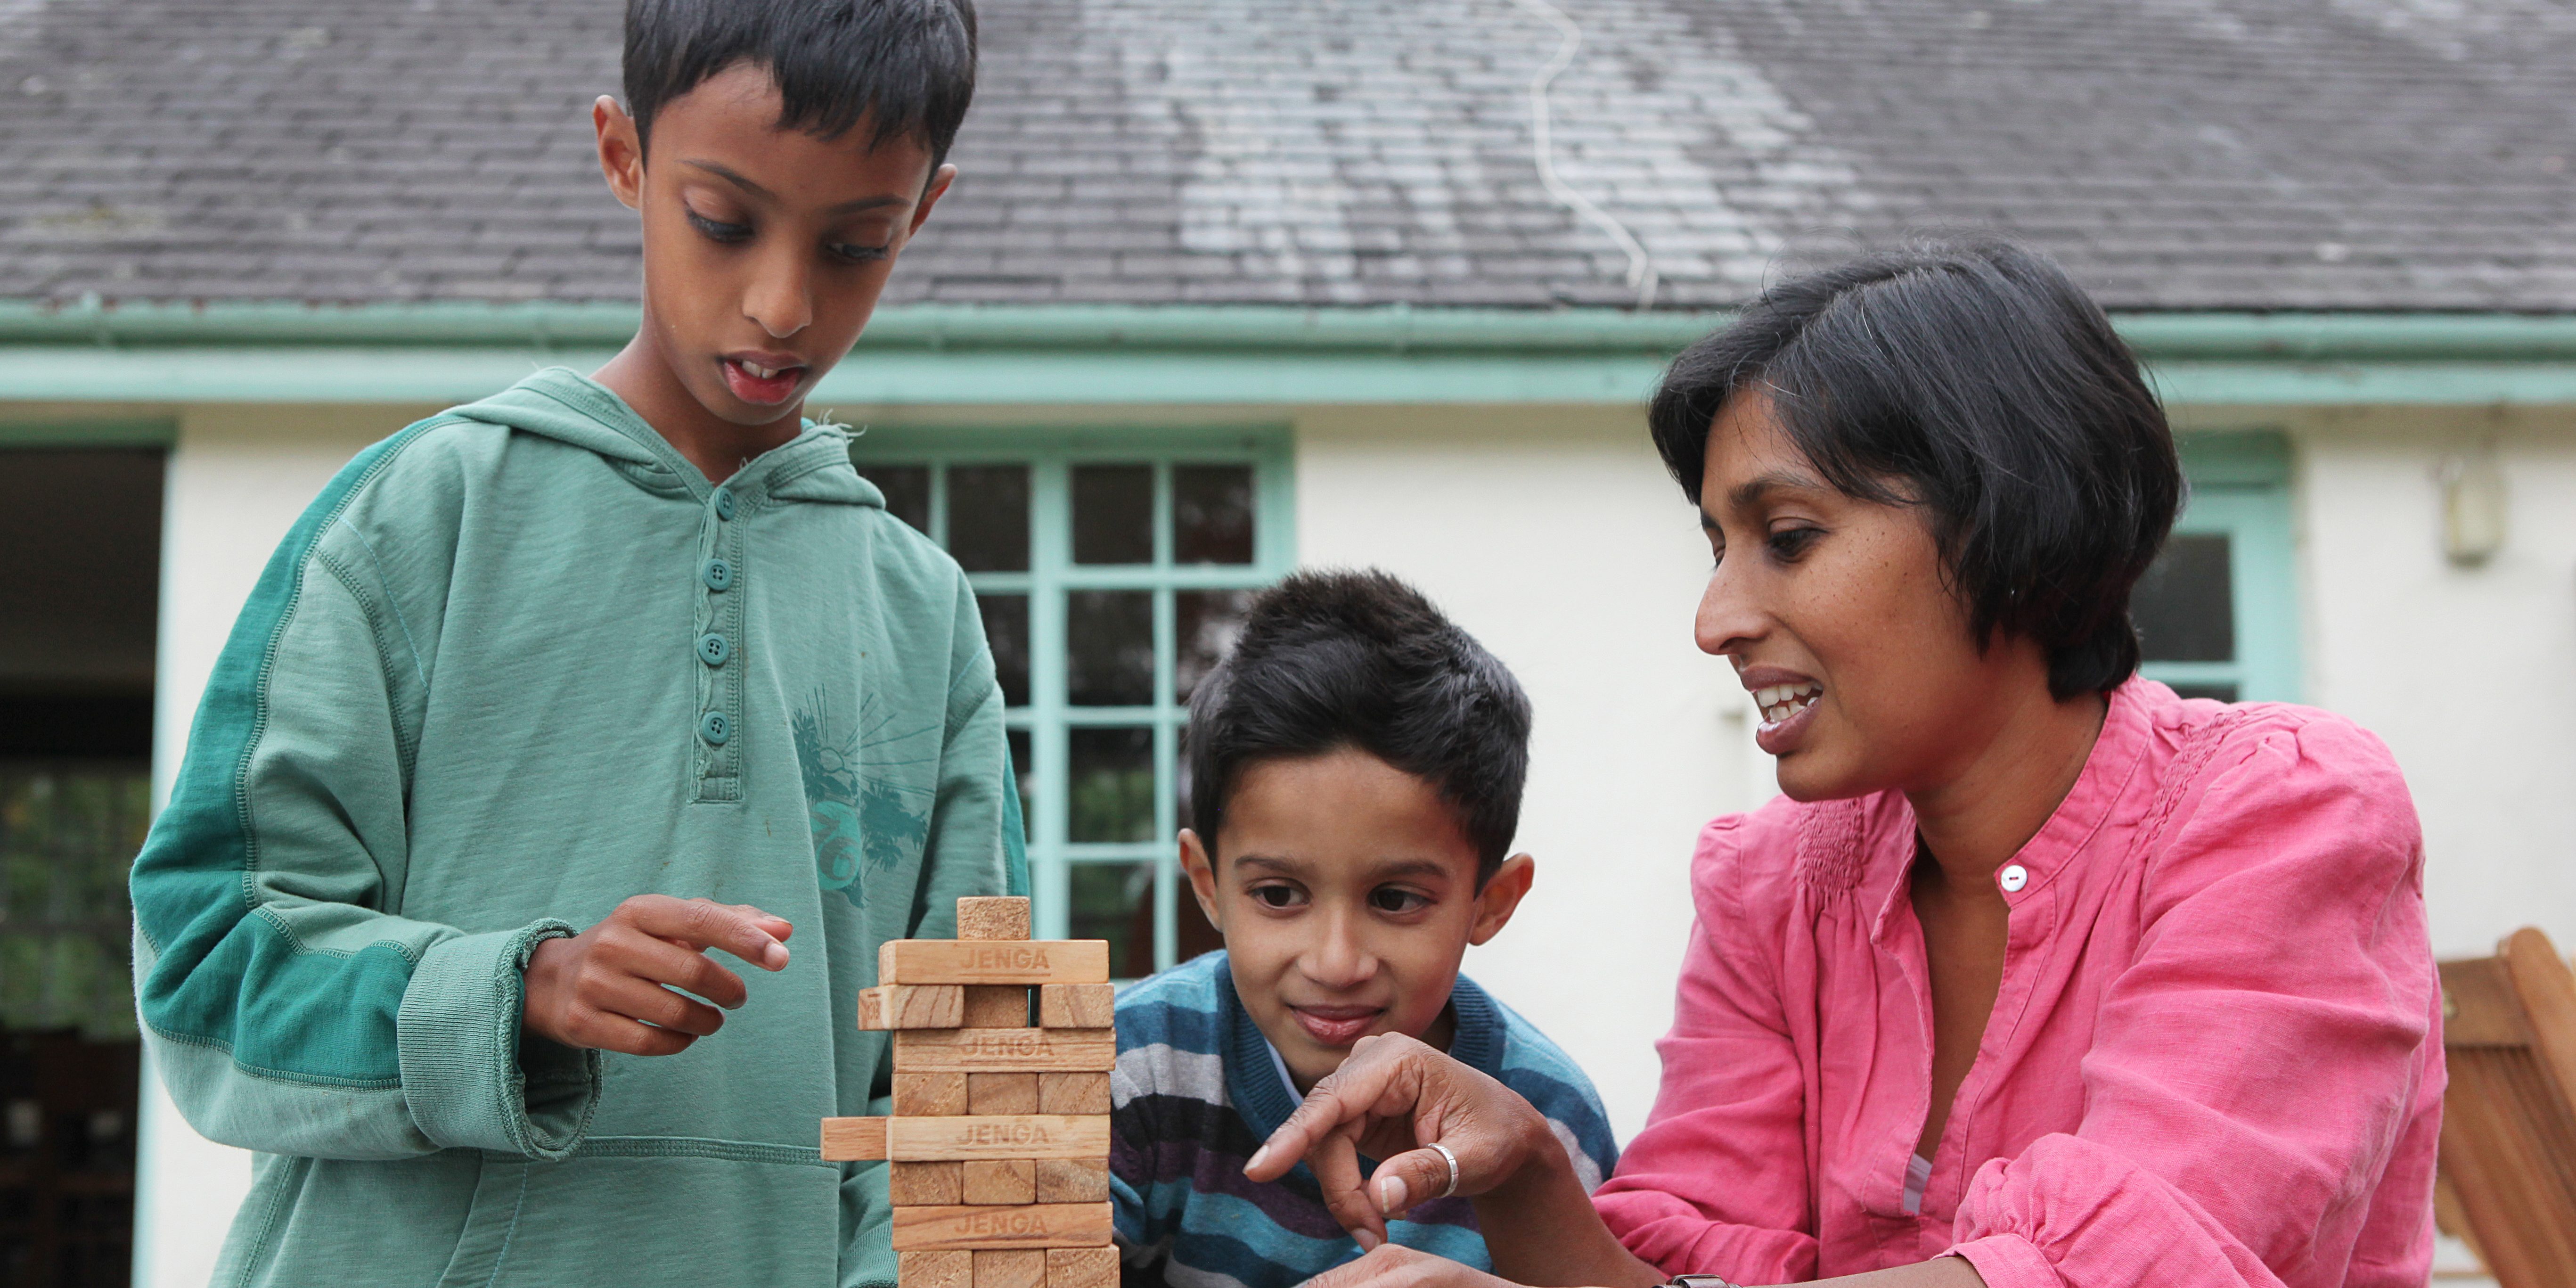 Asian boy with Autism in the garden playing a game of Jenga with his mother and his younger brother